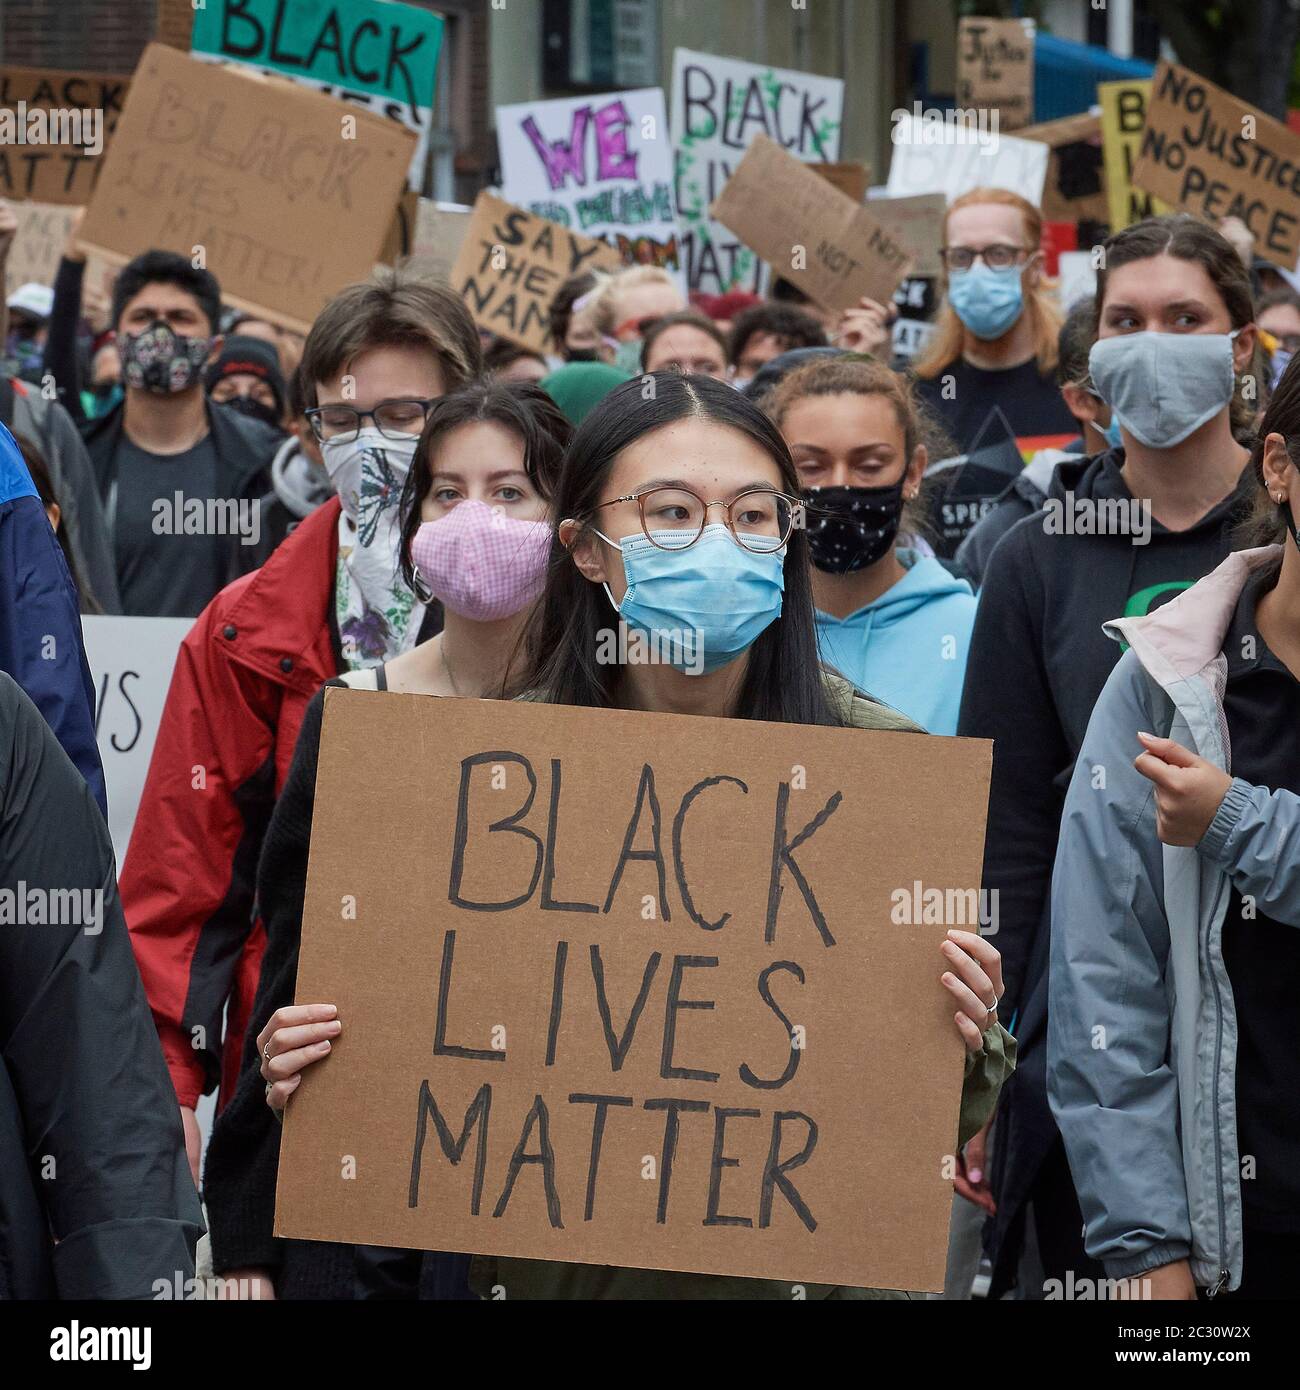 Many carrying signs, people march along a street during a June 7, 2020, Black Lives Matter protest in Eugene, Oregon. Stock Photo